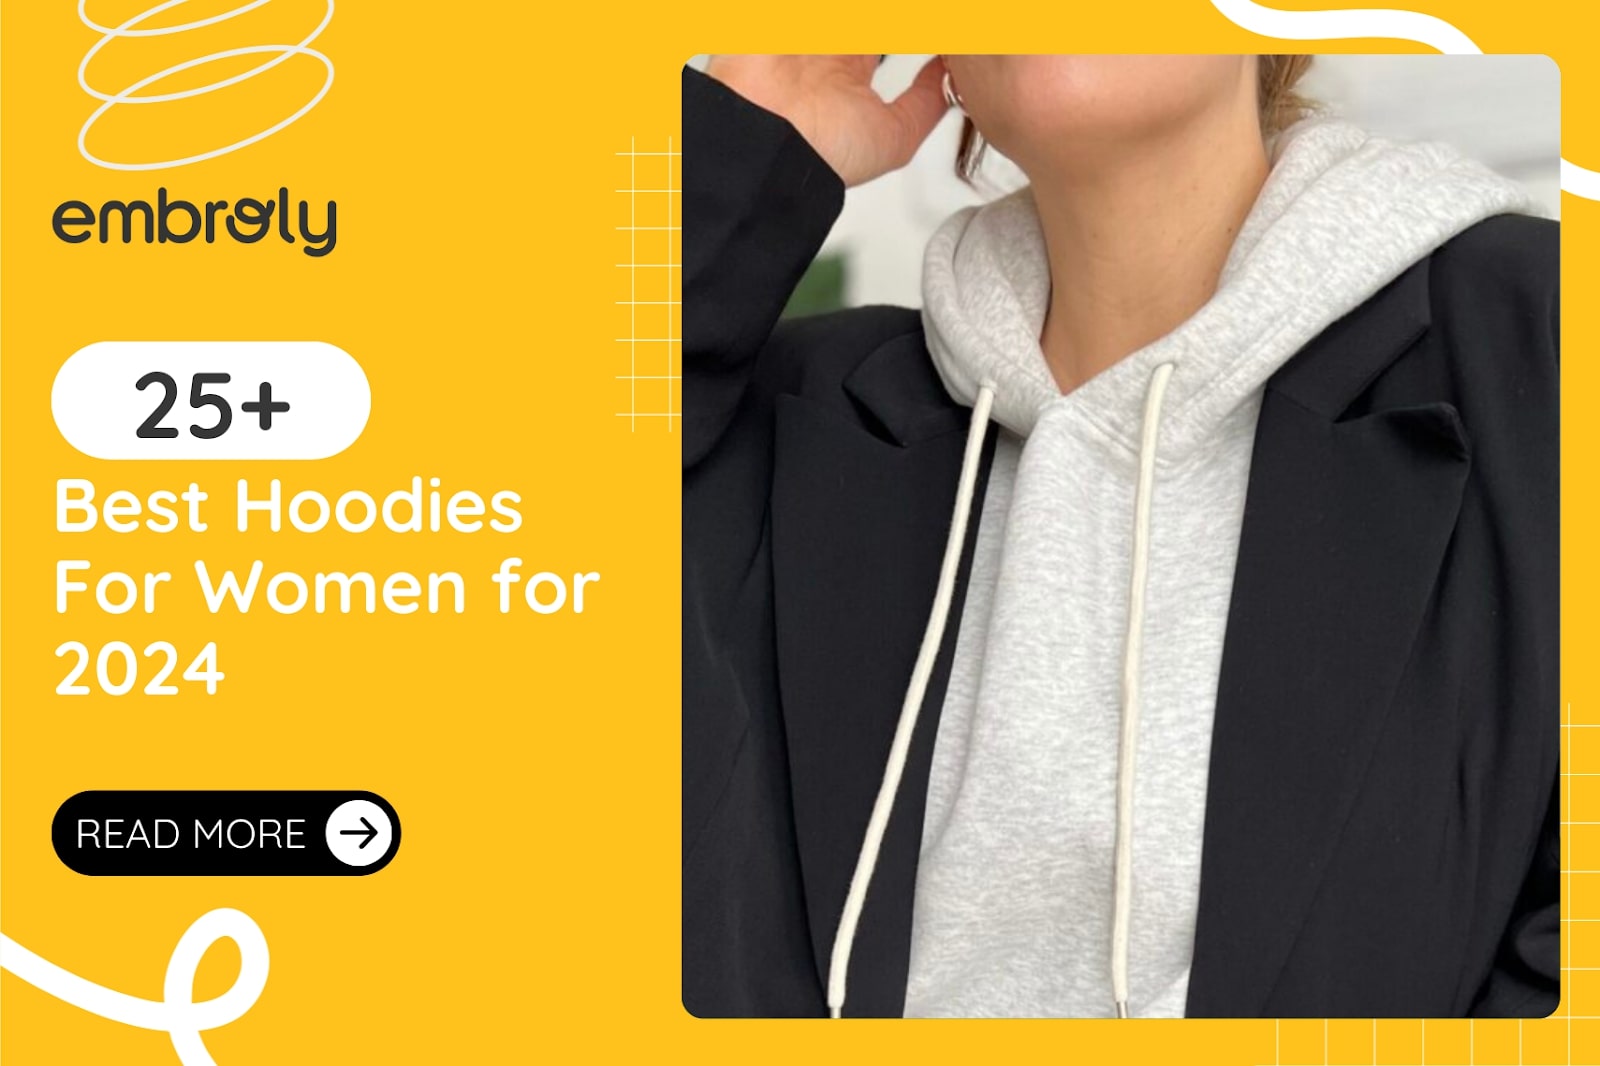 25+ Best Hoodies For Women for 2024